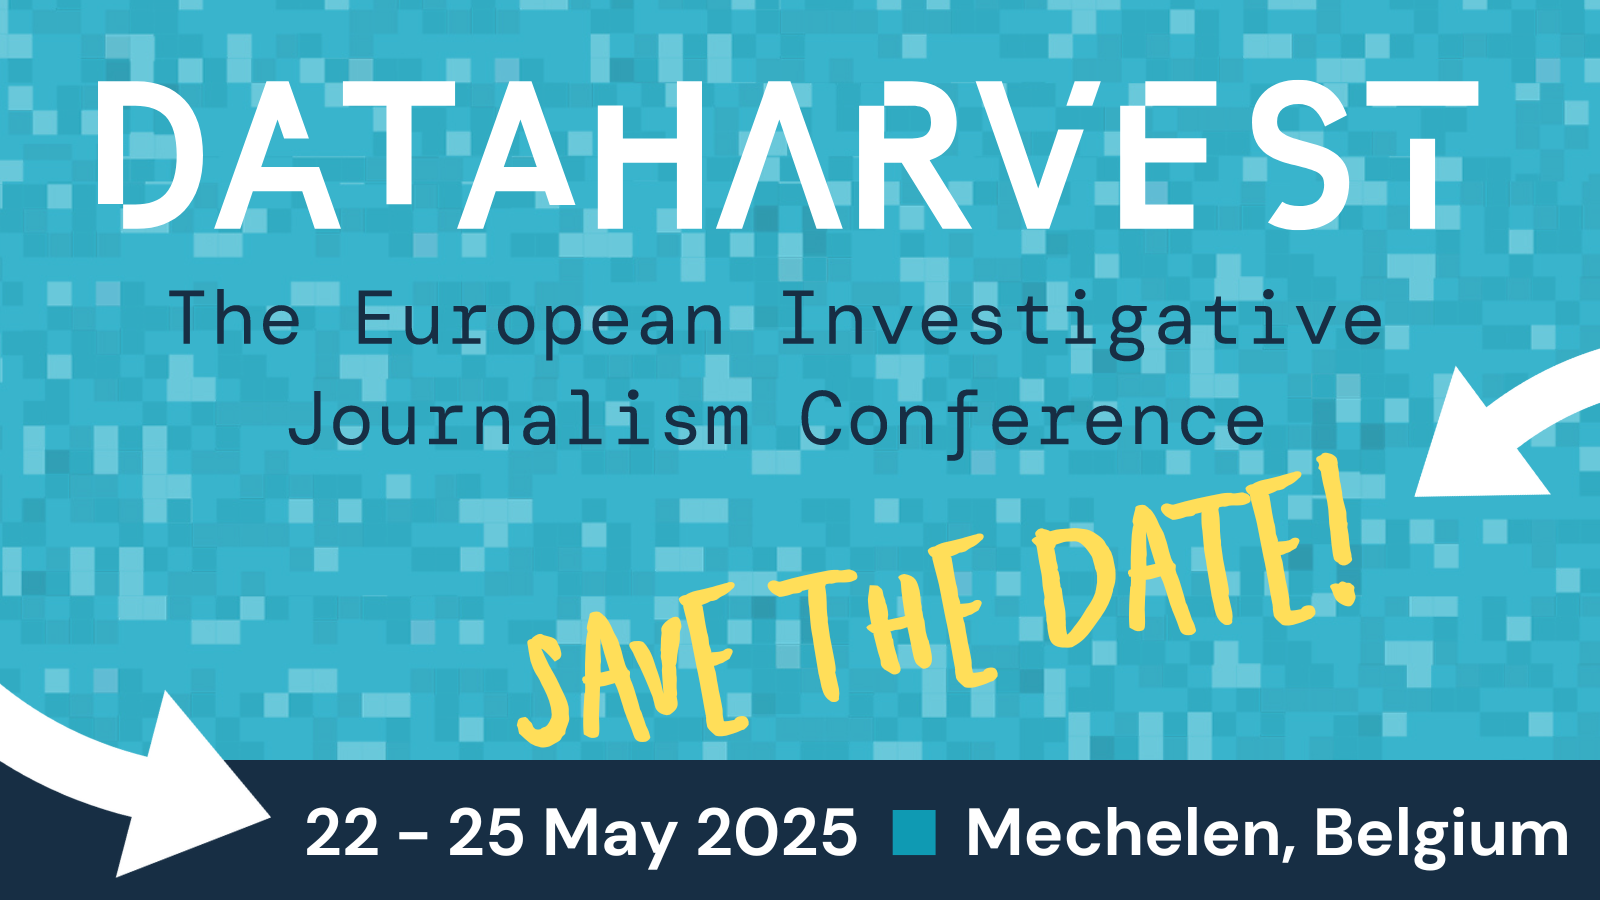 Save the Date for Dataharvest 2025!